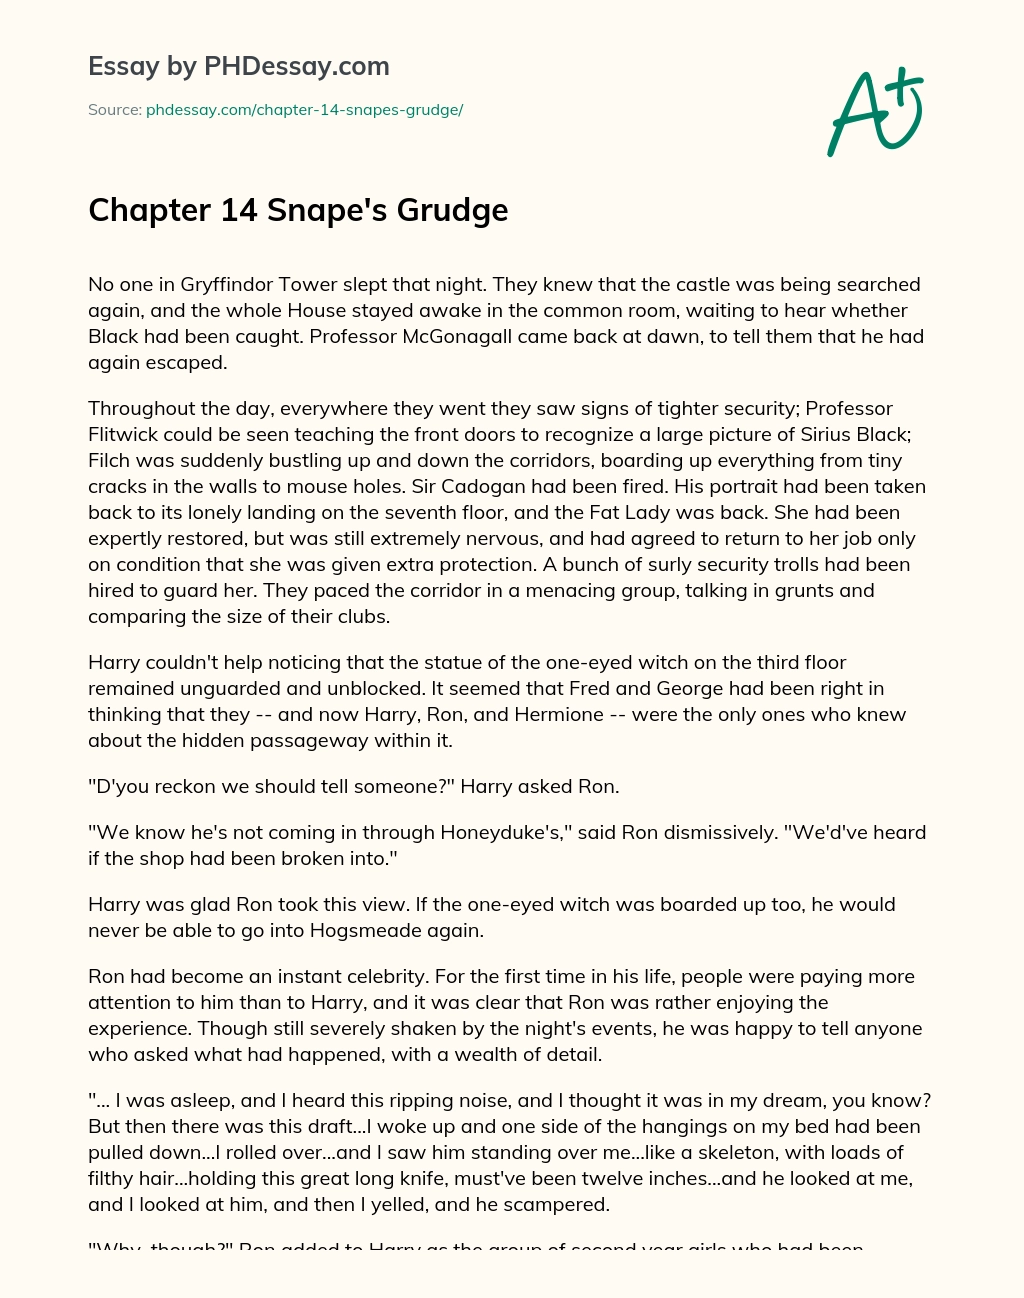 Chapter 14 Snape’s Grudge essay